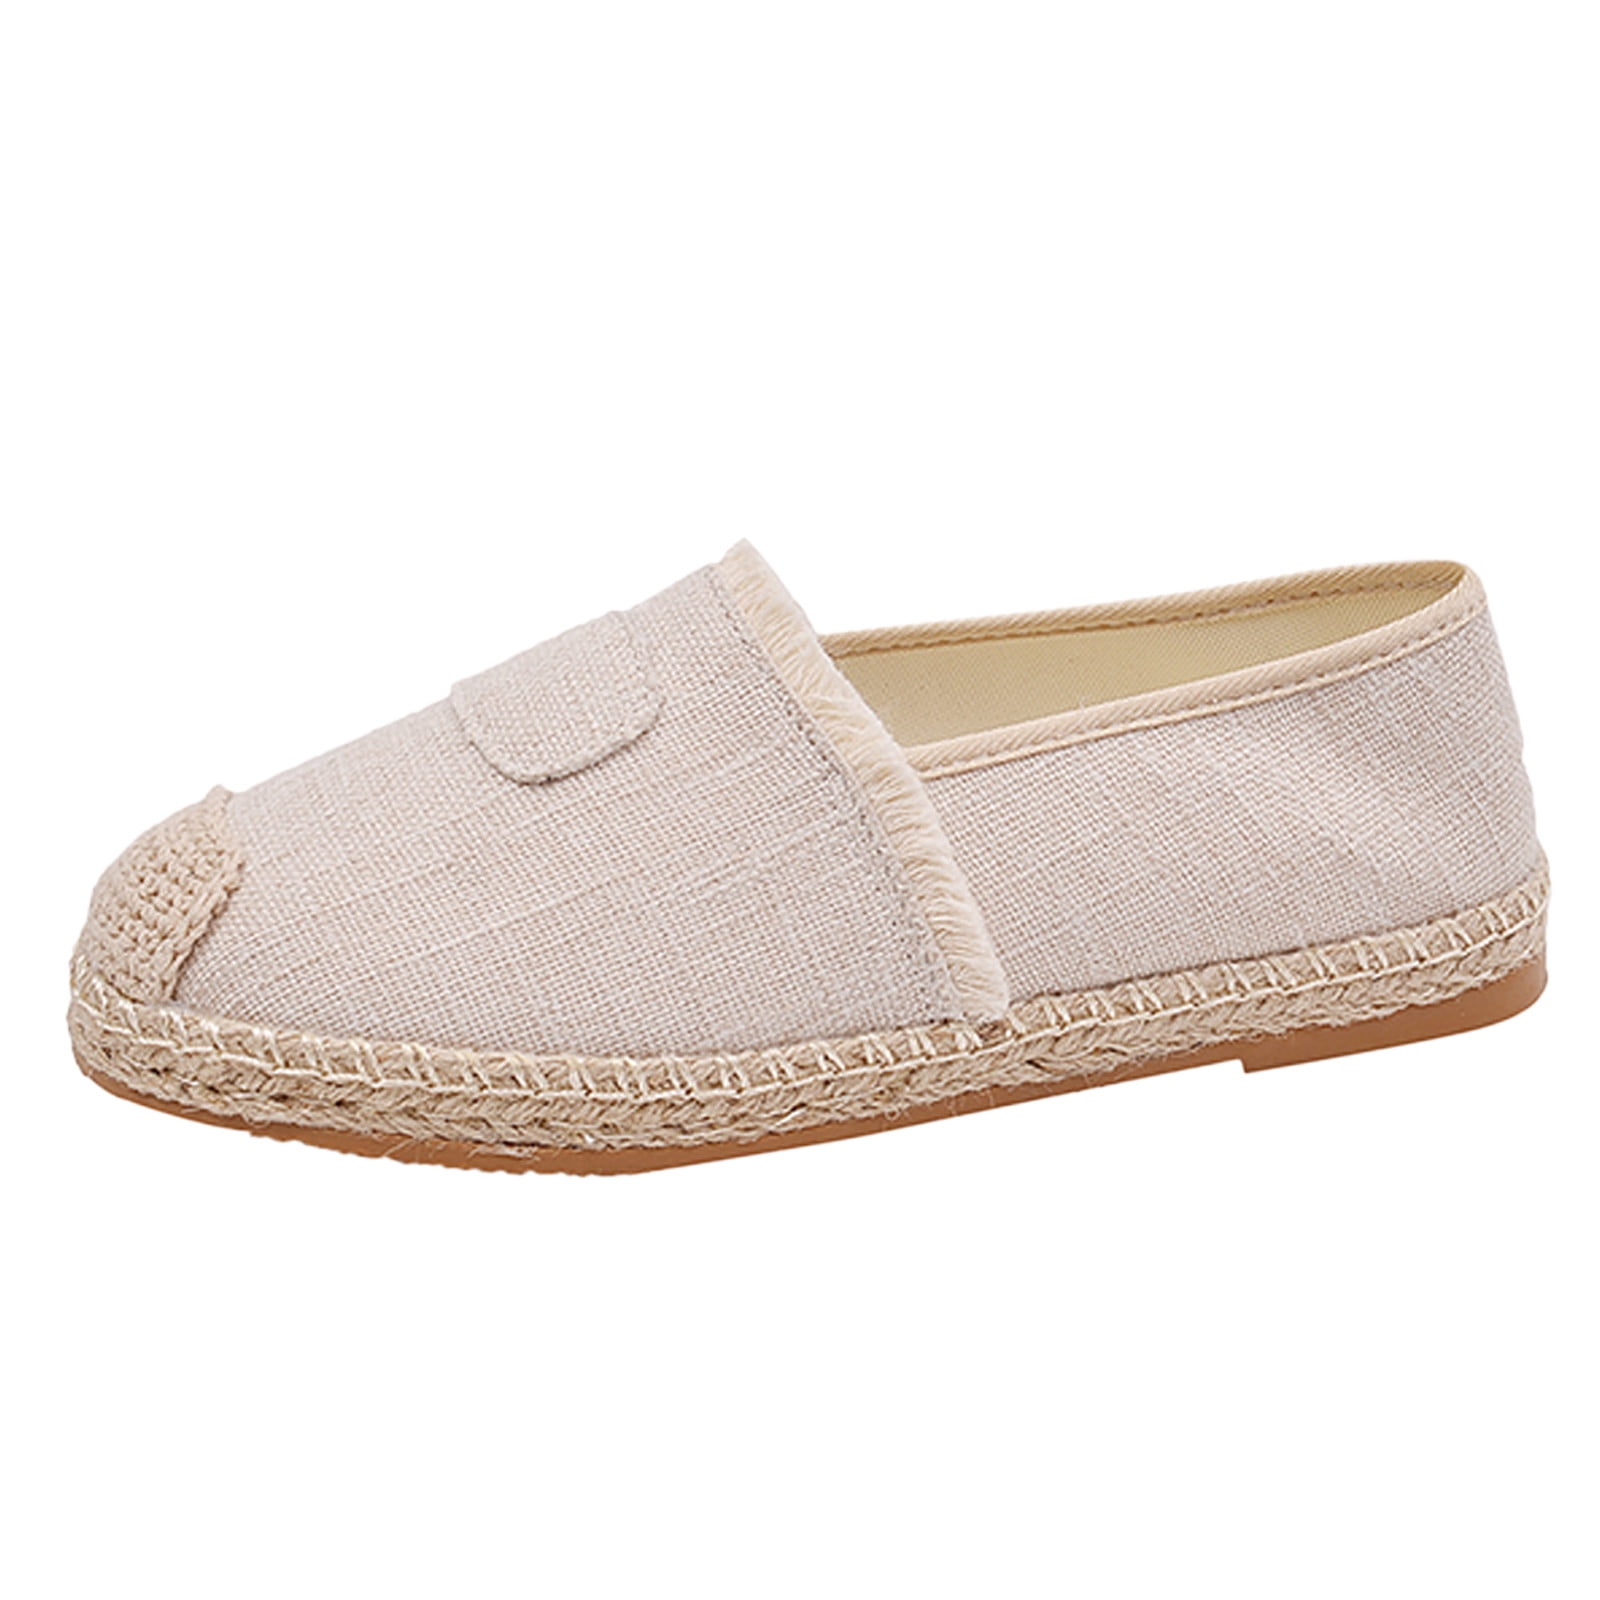 Espadrille Flats For Women Slip On Shallow Mouth Simple Single Shoes Casual  Shoes Work Shoes 